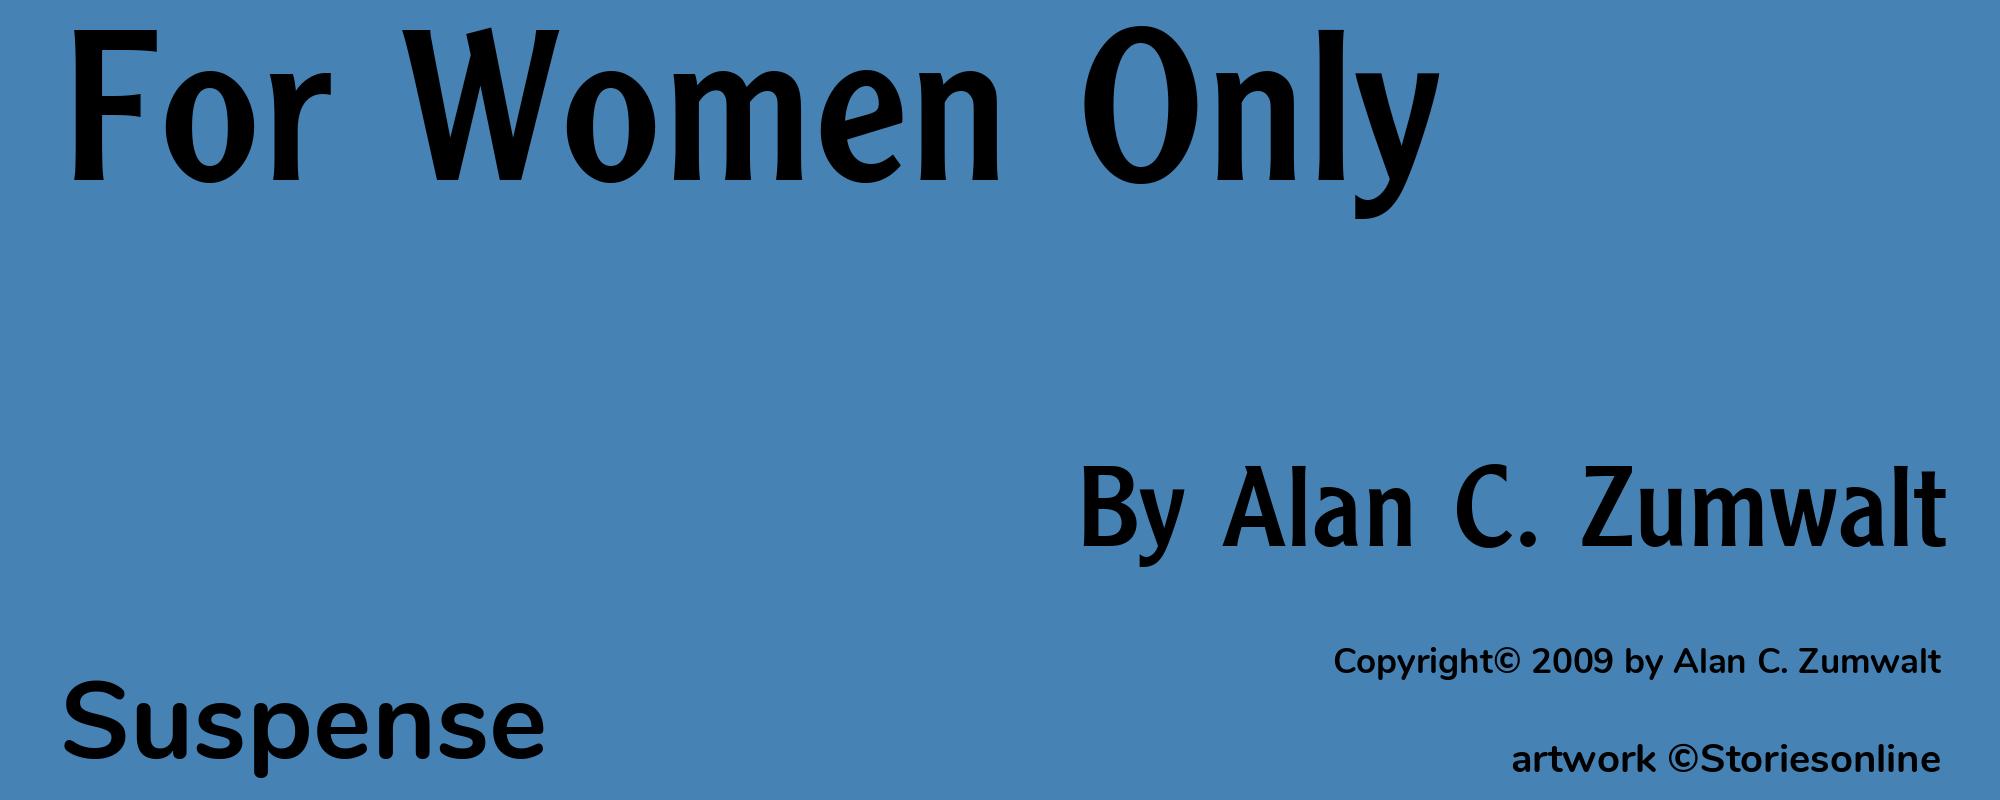 For Women Only - Cover